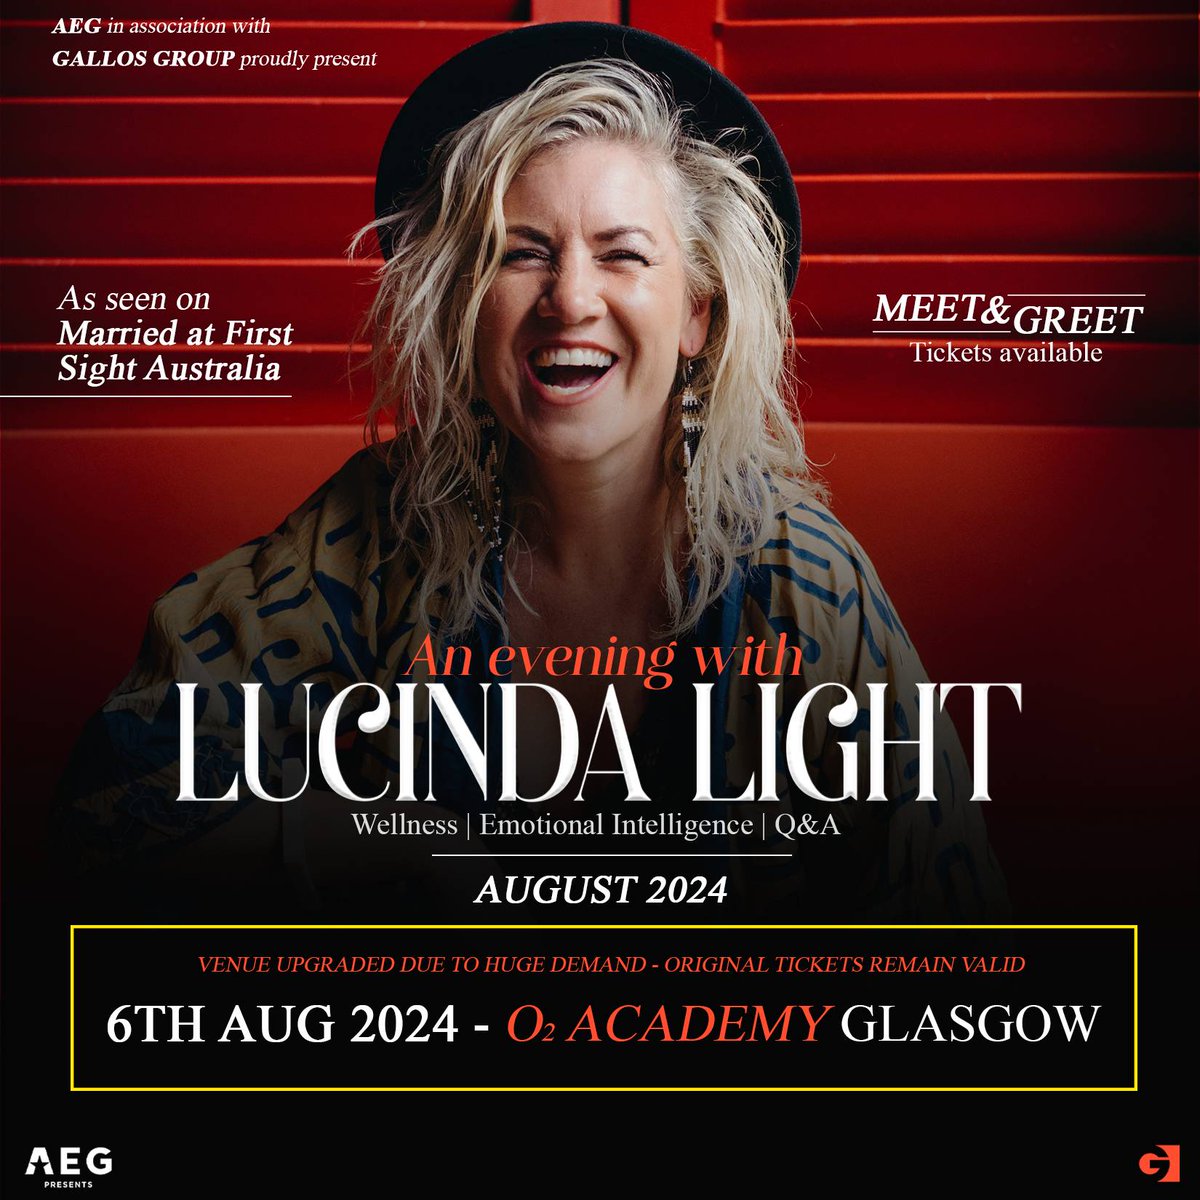 Go go go! Tickets are now on sale for Lucinda Light, when she heads here Tue 6 Aug to speak about her experiences as an expert in emotional intelligence as well as taking part in a fan Q&A. Head to the link. 🎤 🎟️ amg-venues.com/ElBG50REi5l #O2AcademyGlasgow